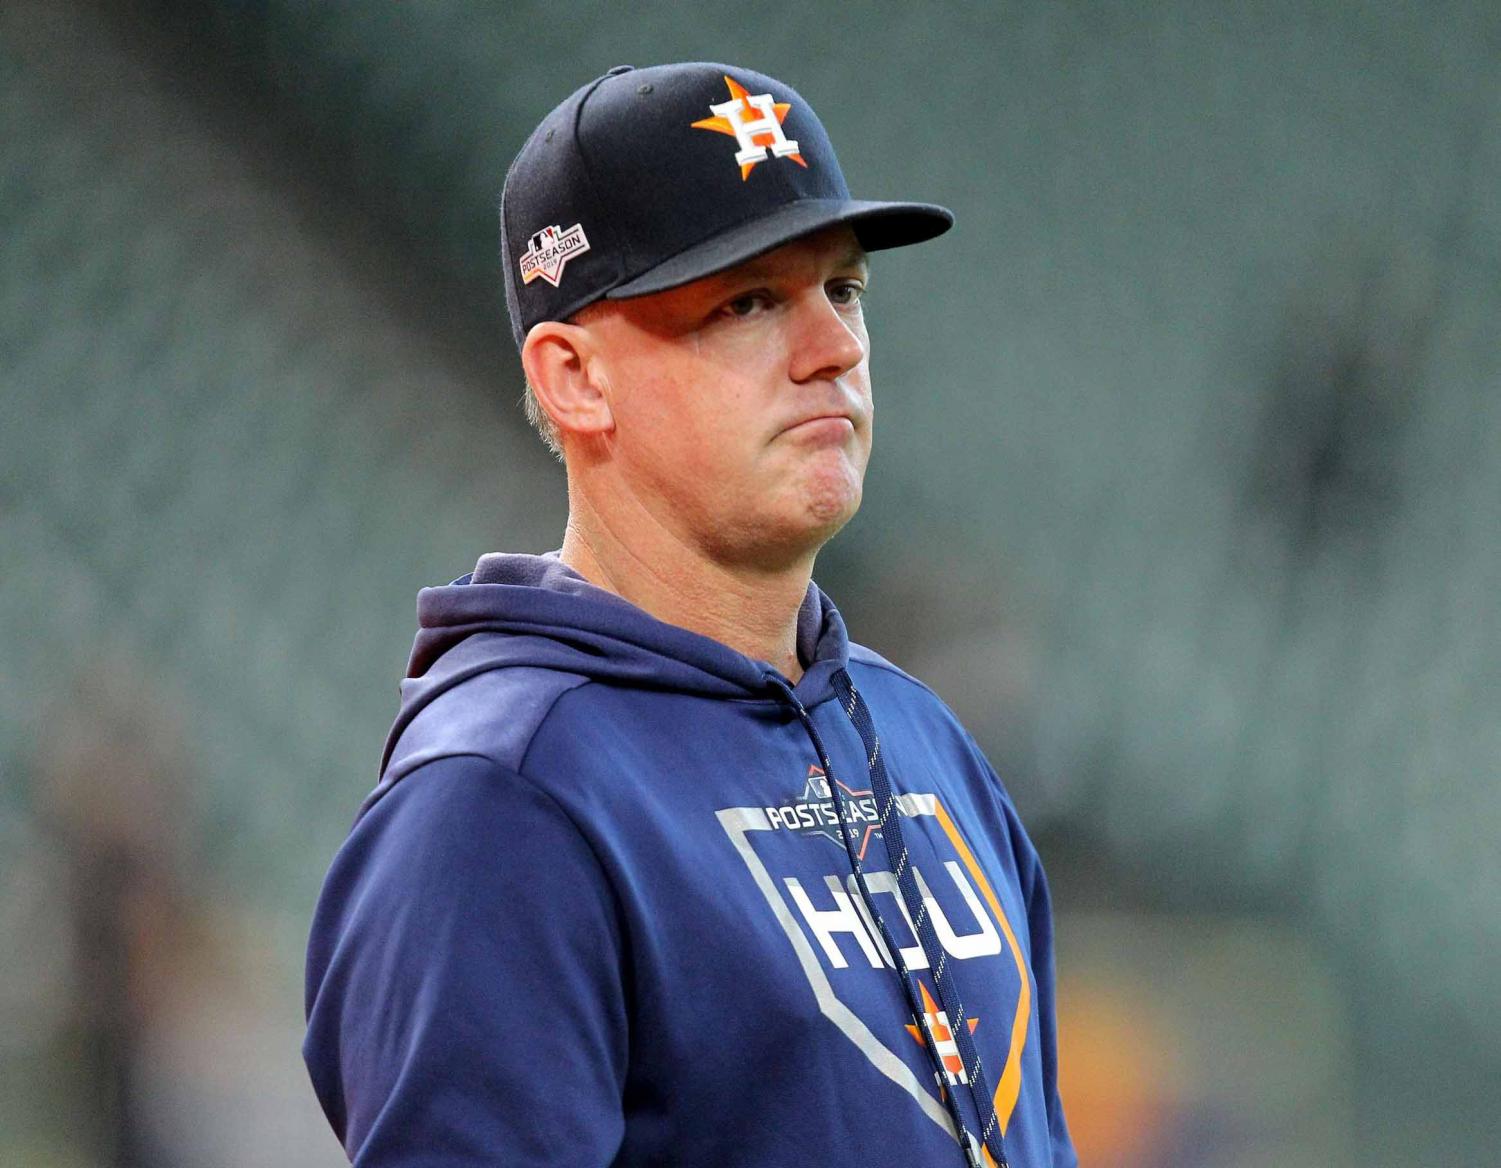 Opinion: Astros cheating scandal sets bad example for student